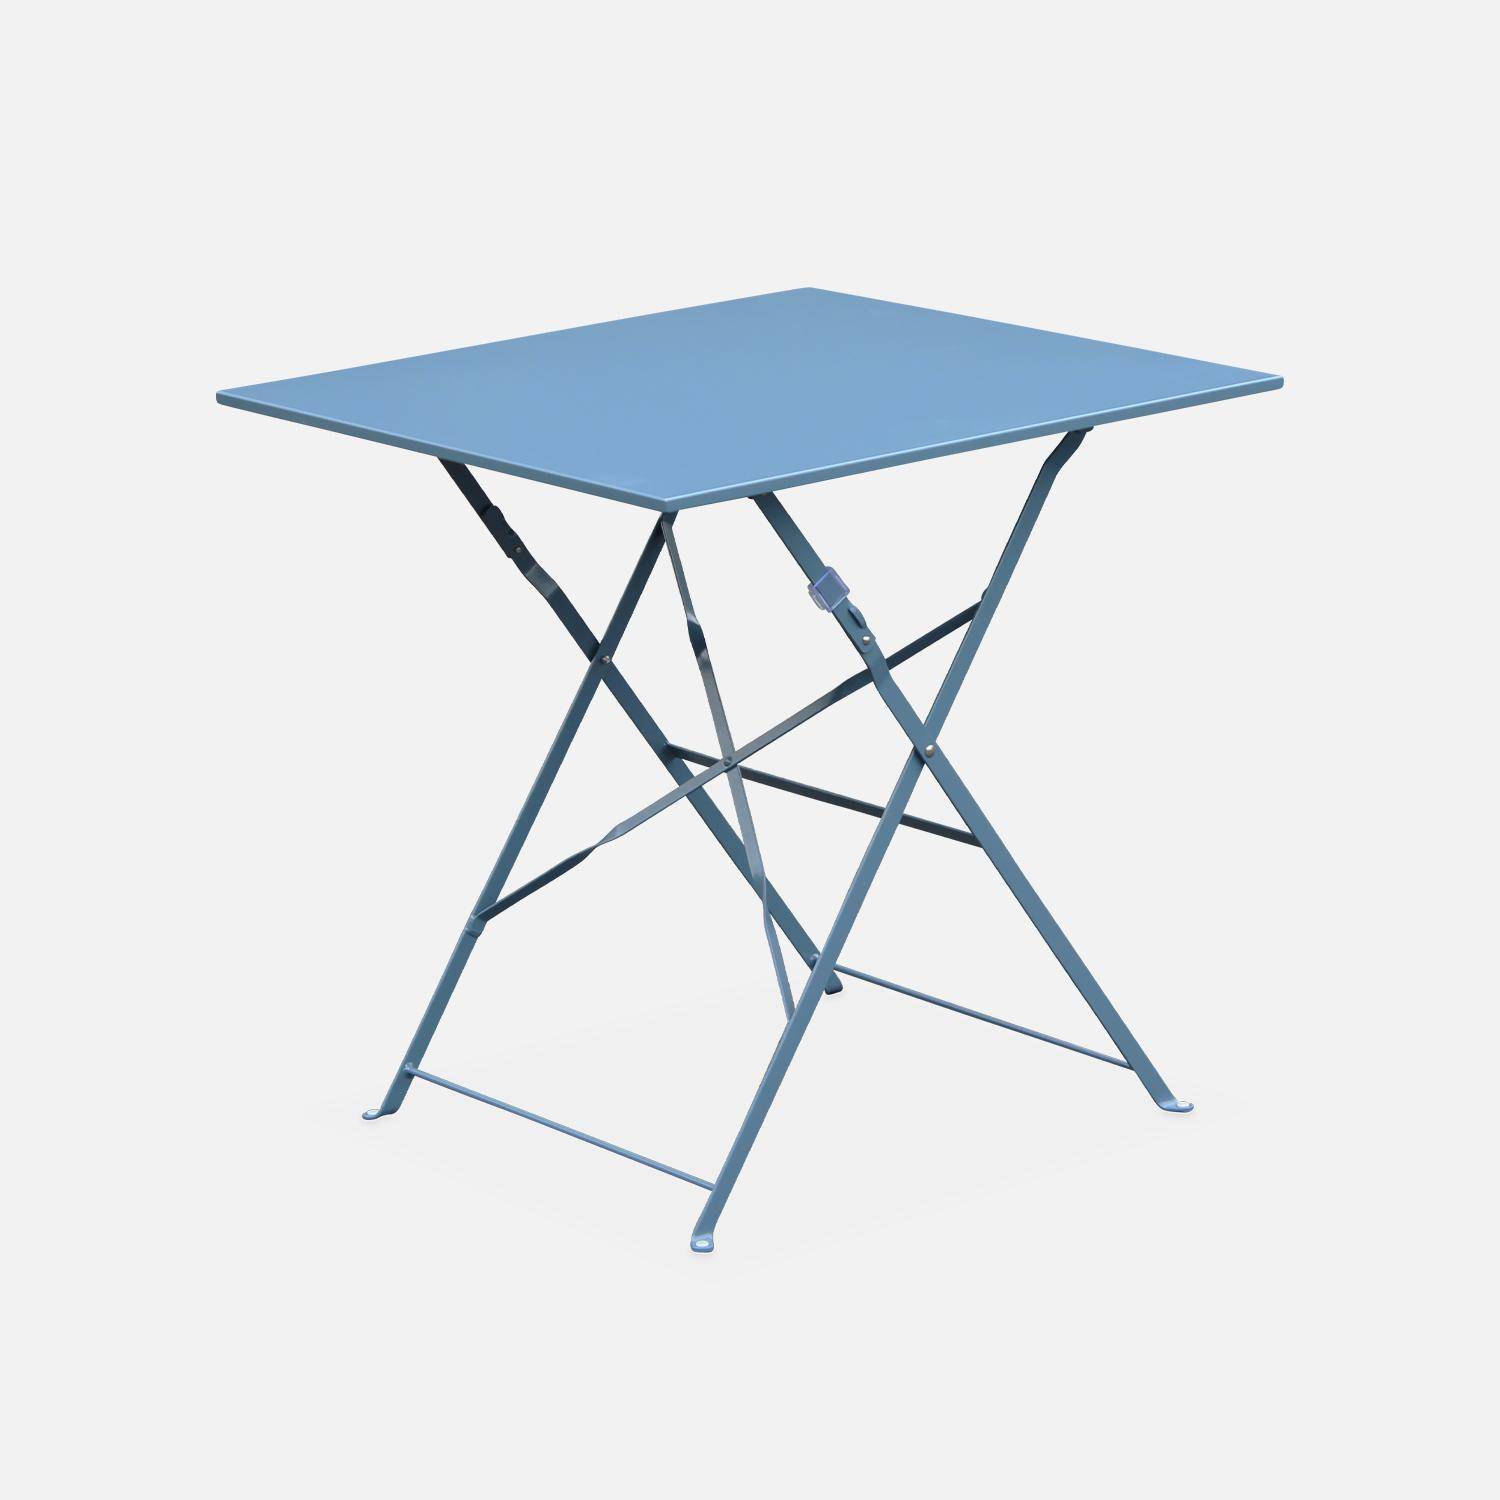 2-seater foldable thermo-lacquered steel bistro garden table, 70x70cm - Emilia - Blue grey,sweeek,Photo3